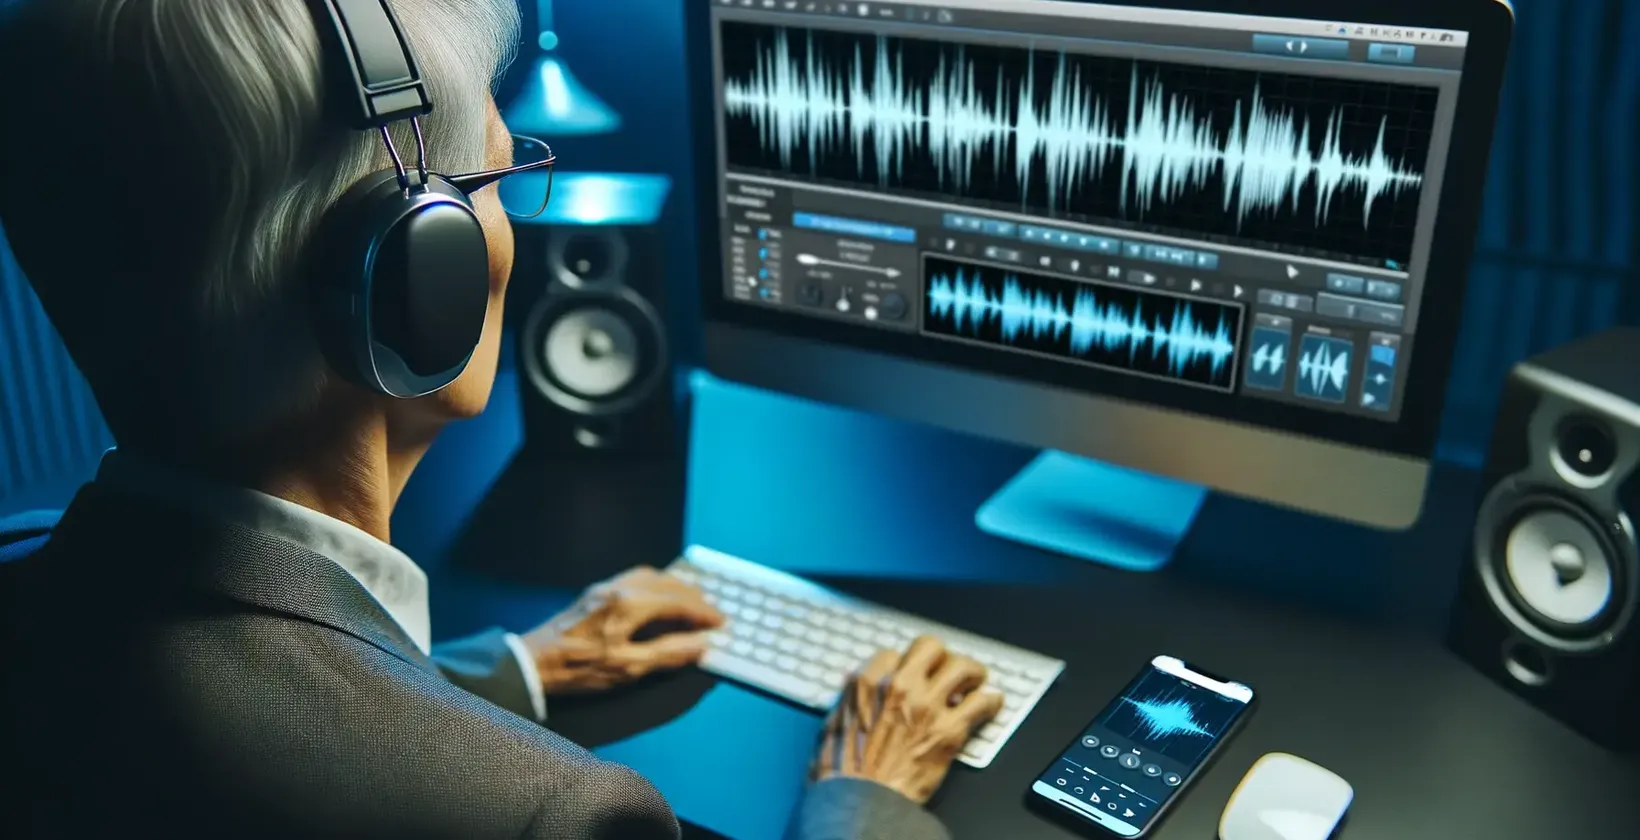 Audio to text for hard of hearing scene shows a silver-haired in headphones working at a blue-lit desk with glasses.